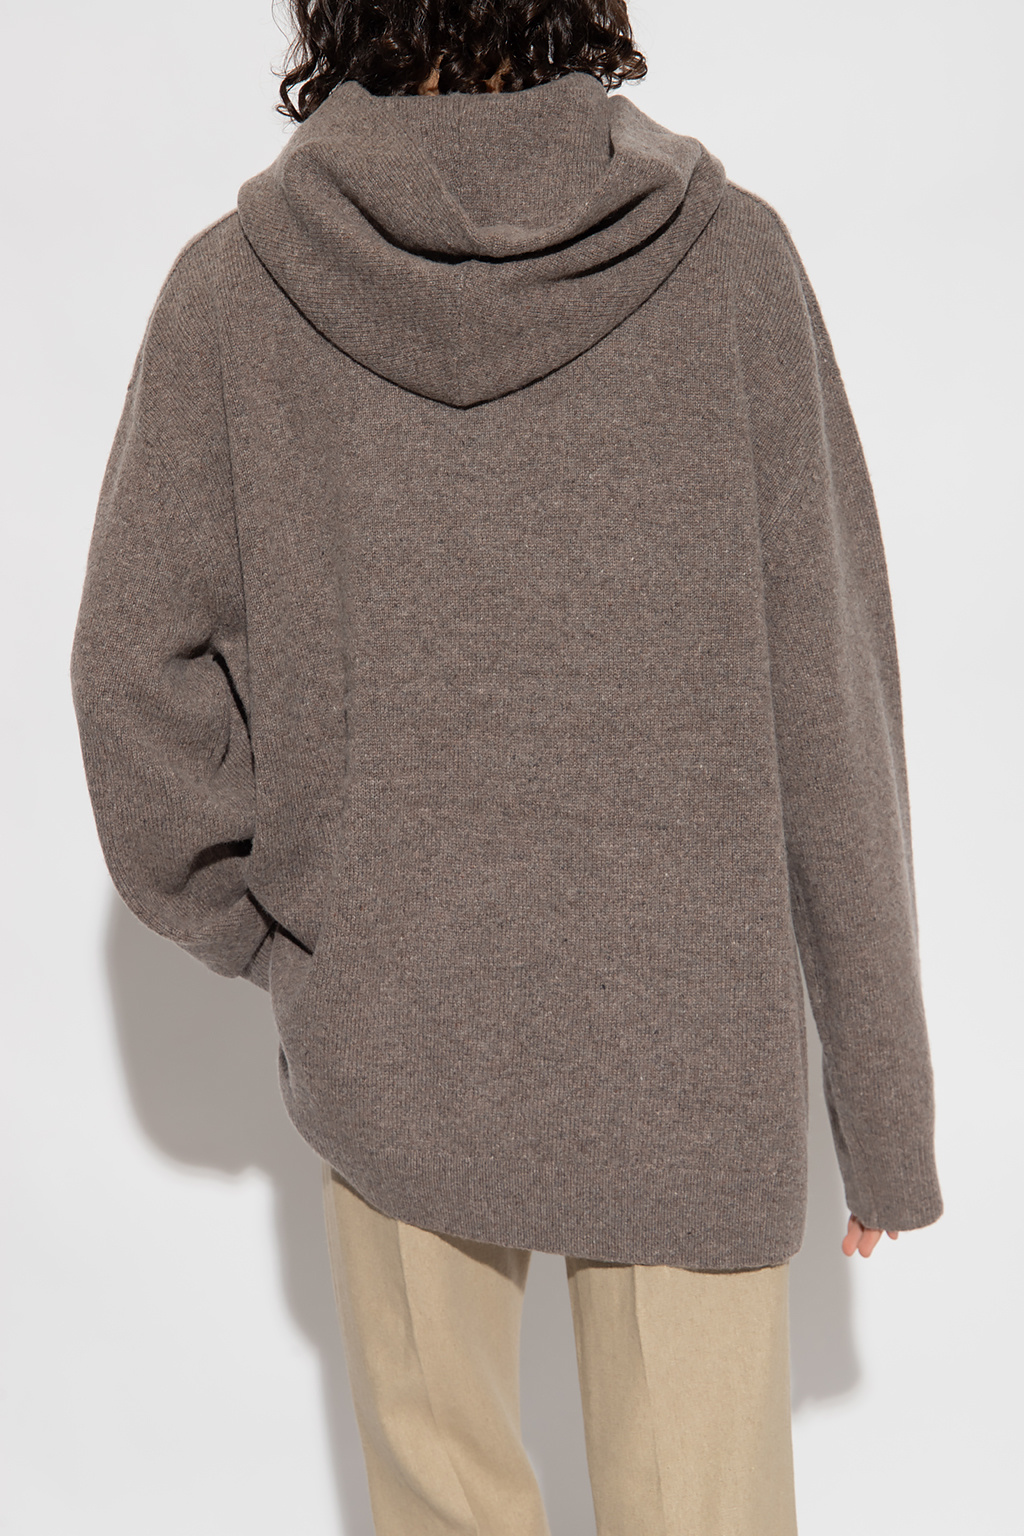 Acne Studios Croppeded sweater